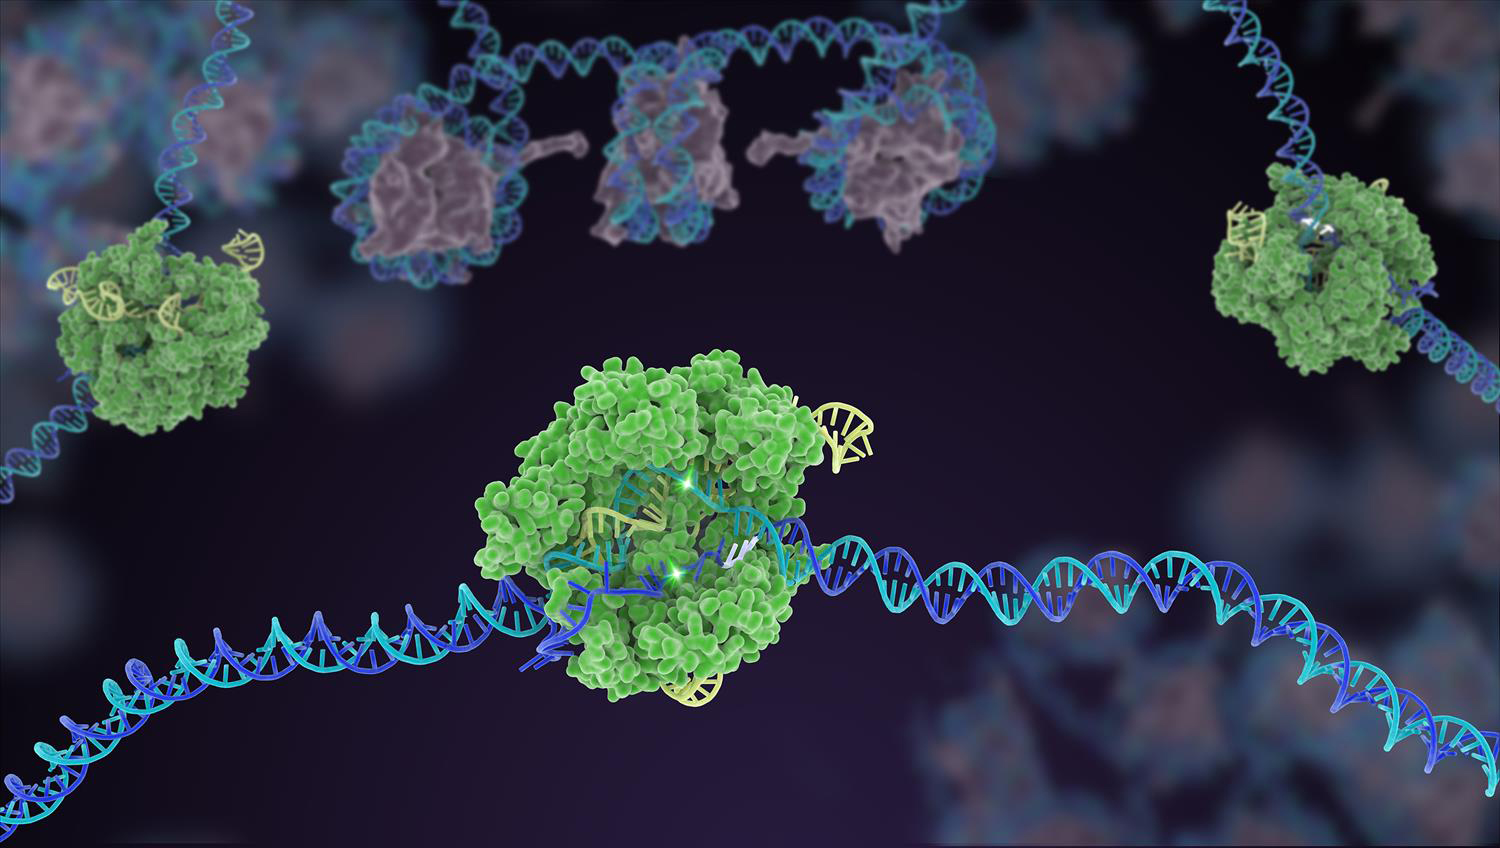 Cas9 protein involved in the CRISPR gene-editing technology